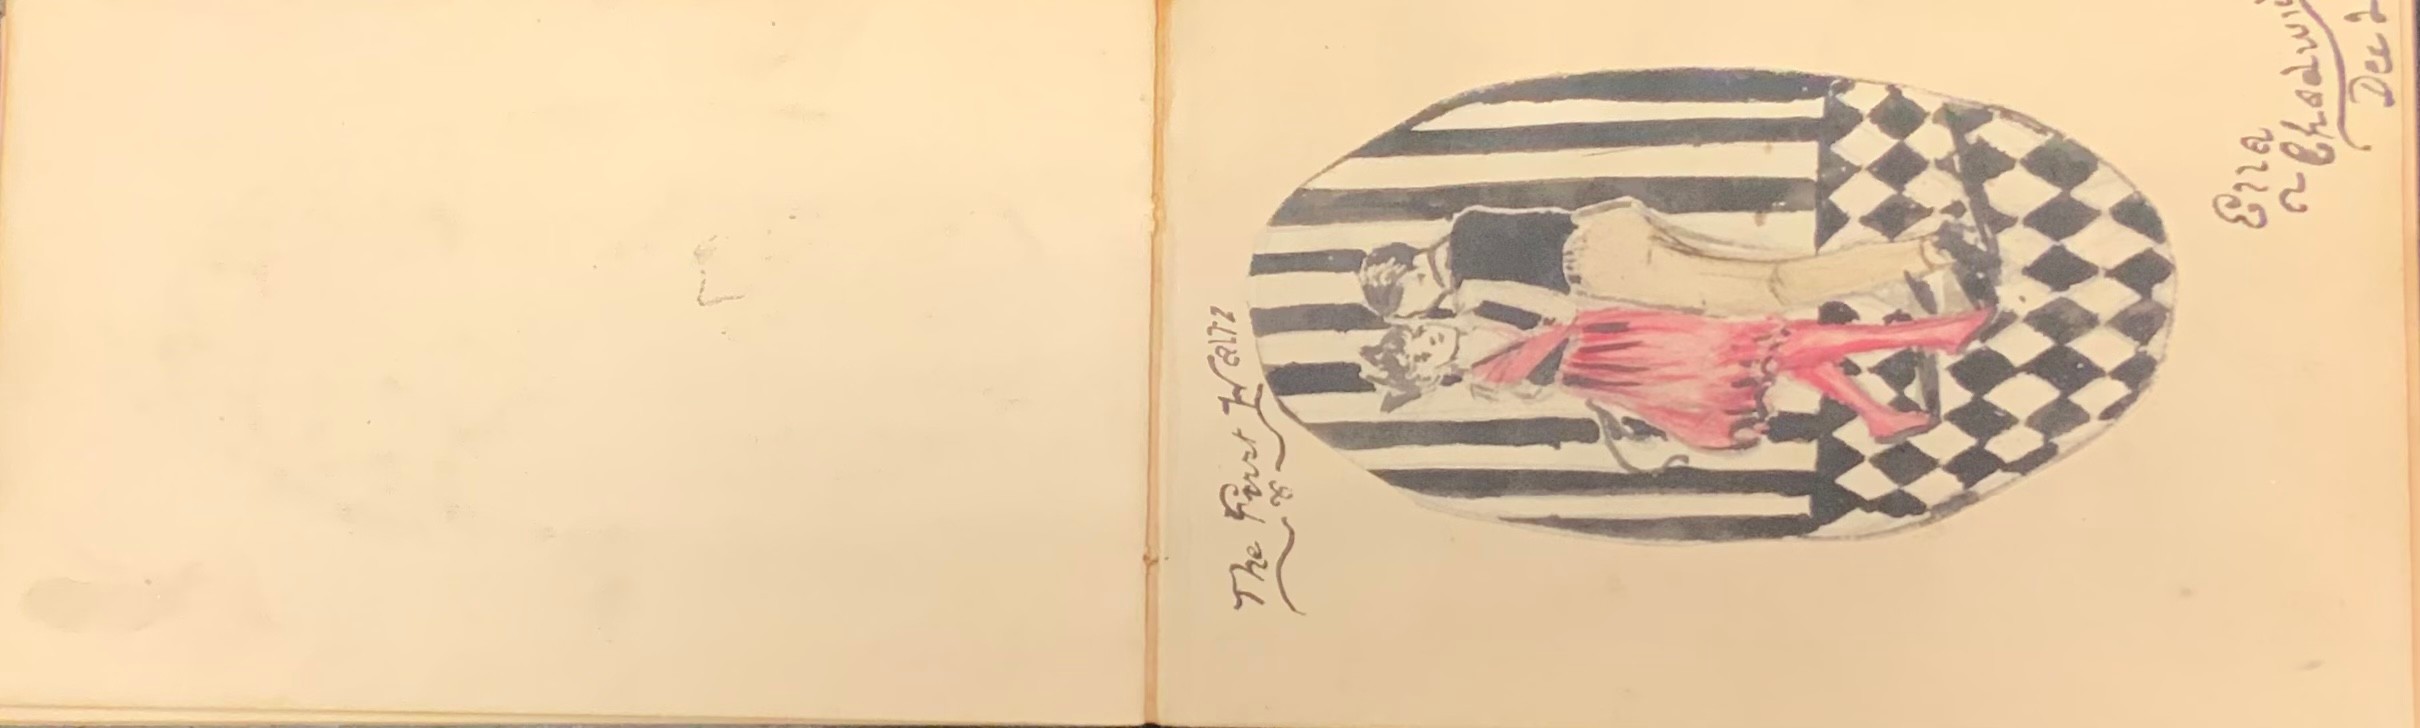 Suffragette Interest - An autograph book for Mary Emmott's (1866-1954) Political Activist, executive - Image 2 of 4